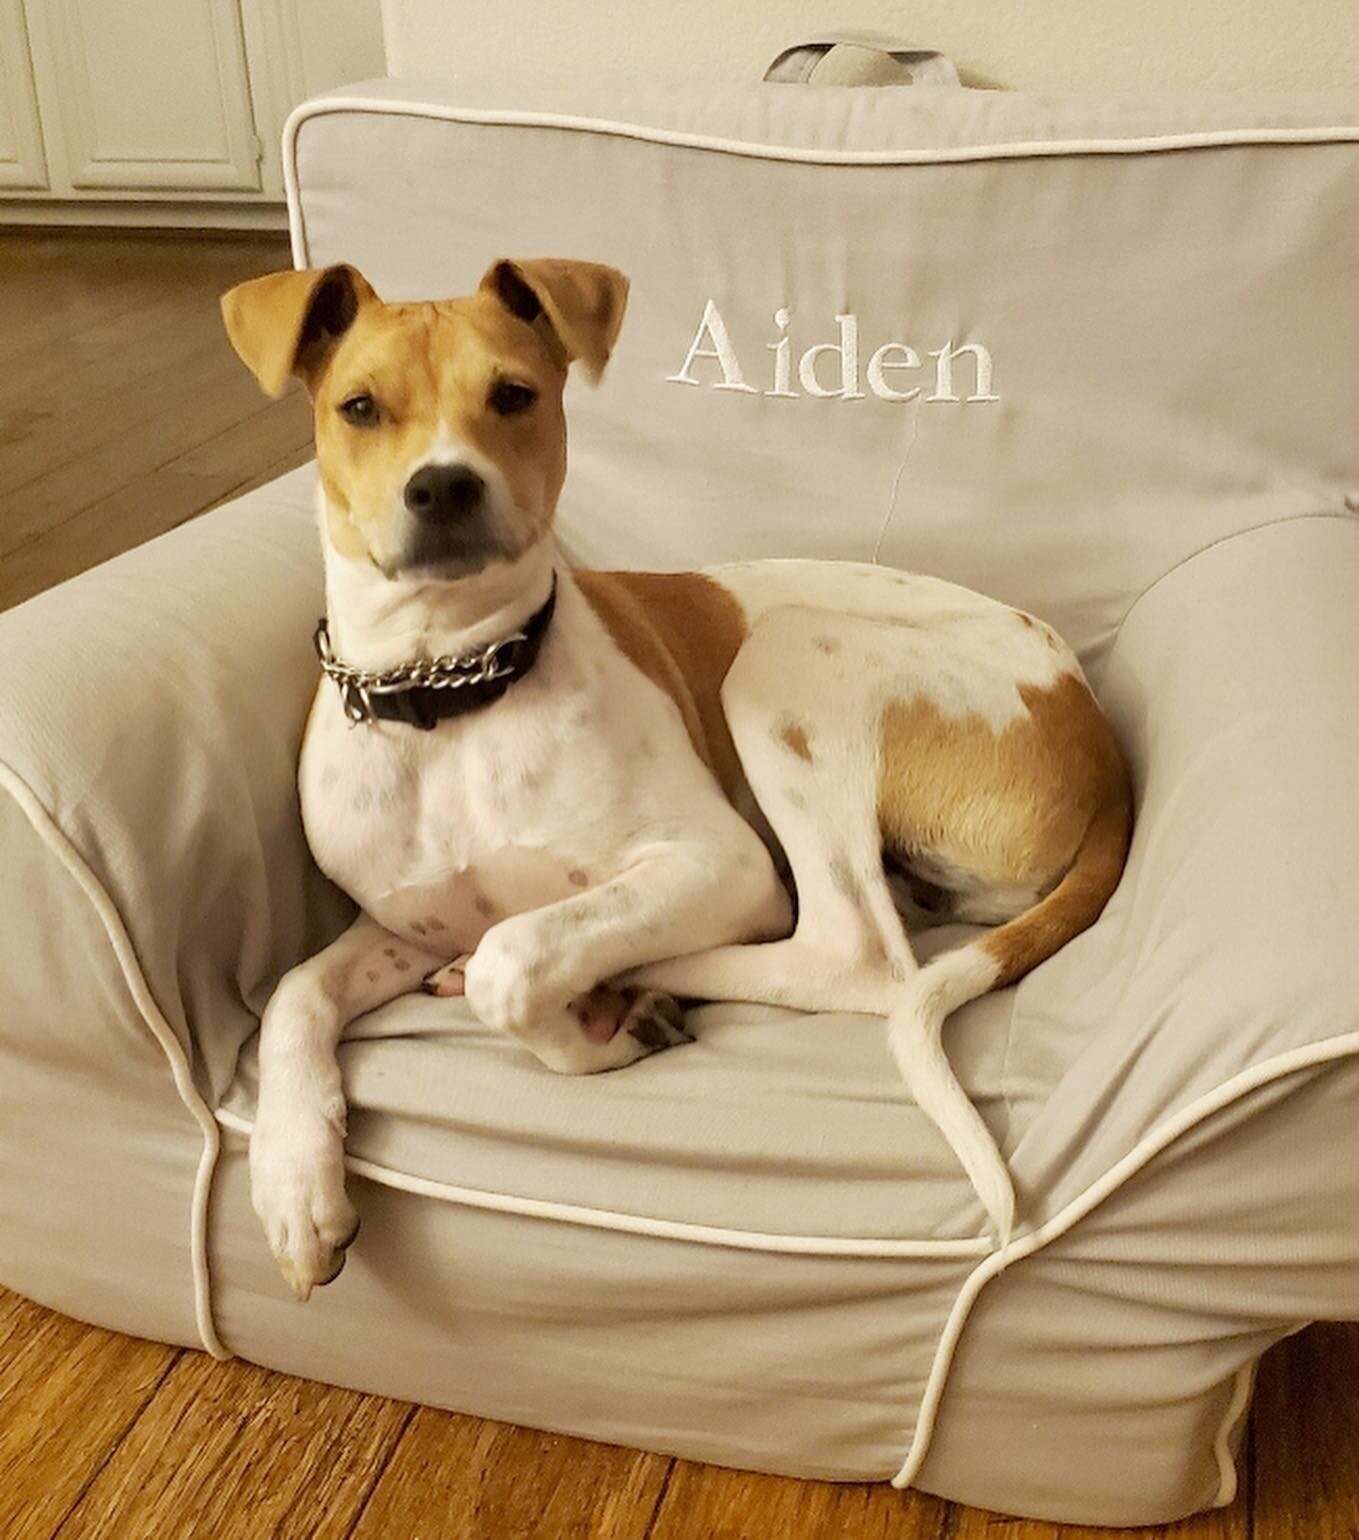 Adopt this adorable boy Roger!

He is a 10 month old Italian grey hound mix. He is a very shy guy when it comes to people, but once you have made a connection with him, he is truly such a sweetie! He adores other dogs, especially labs, for some reaso